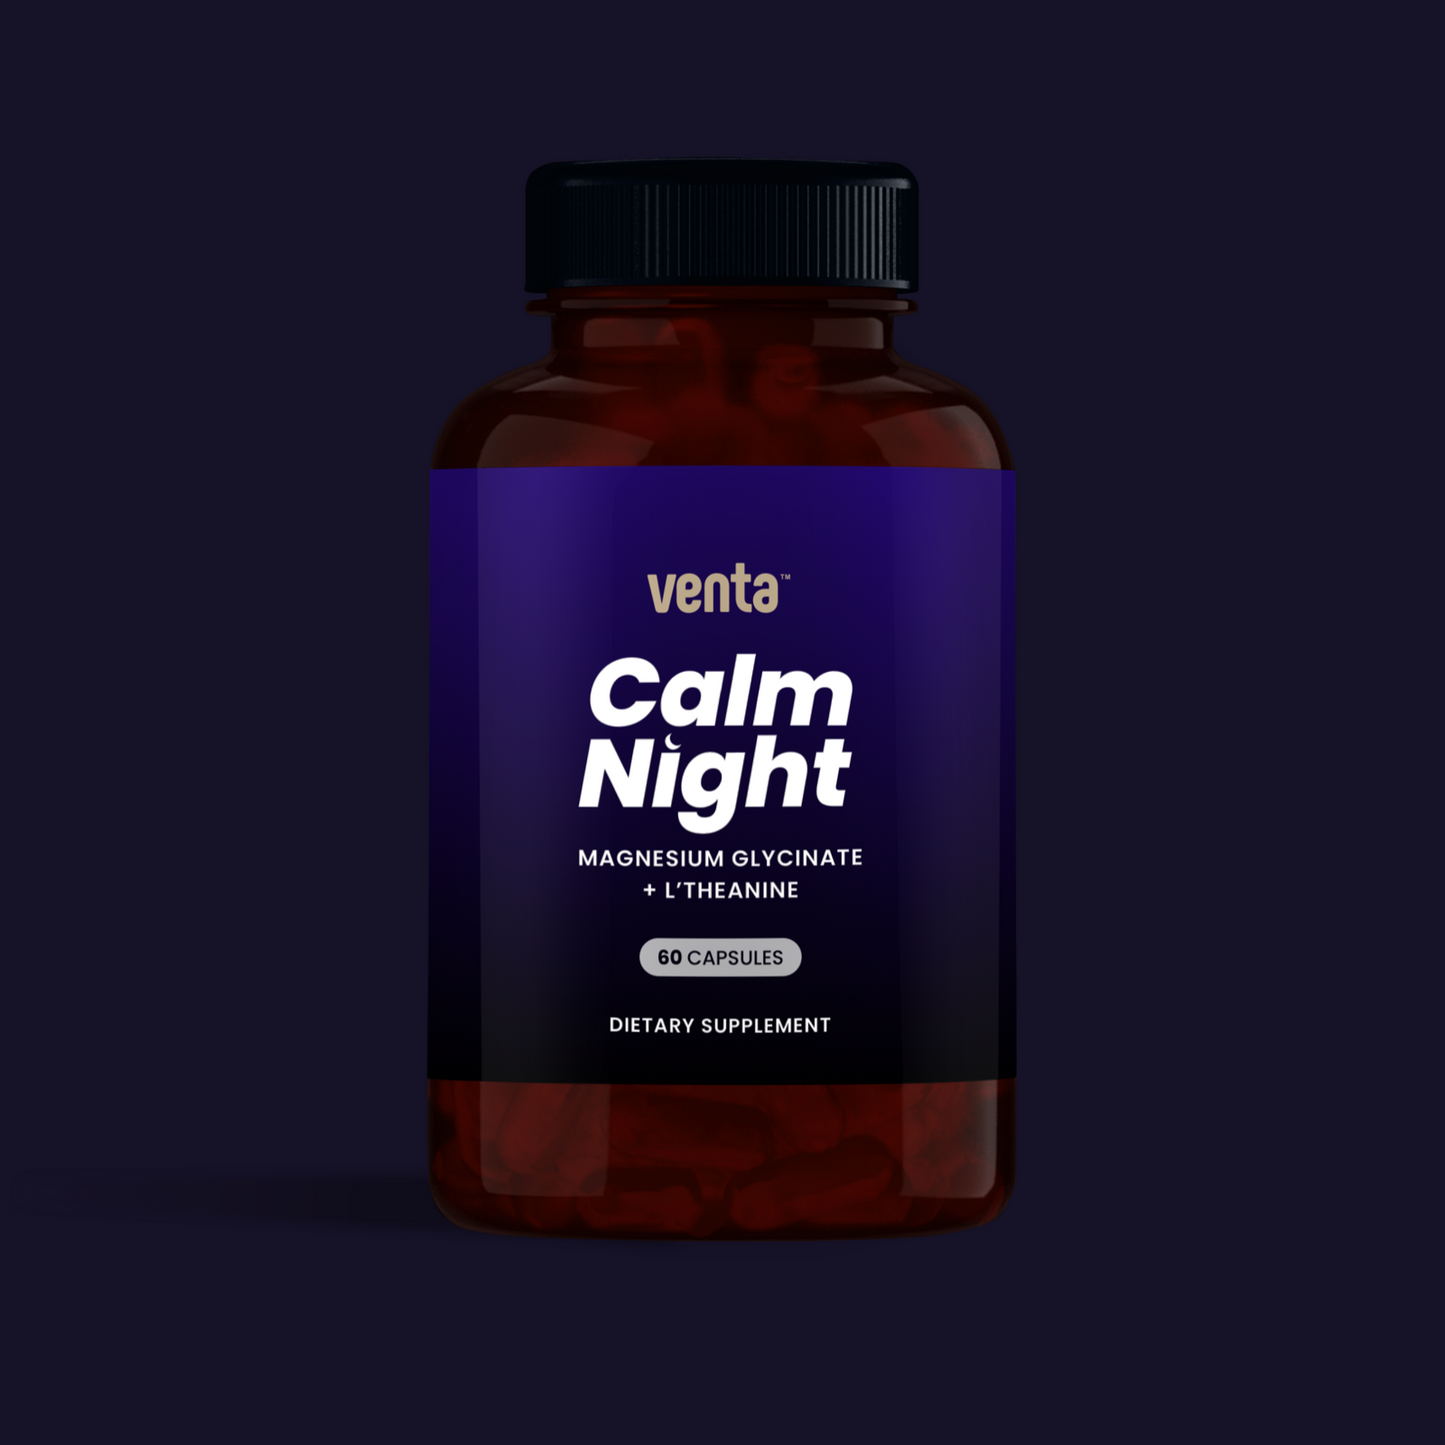 Calm Night - Sleep support Capsules with Magnesium Glycinate & L-Theanine